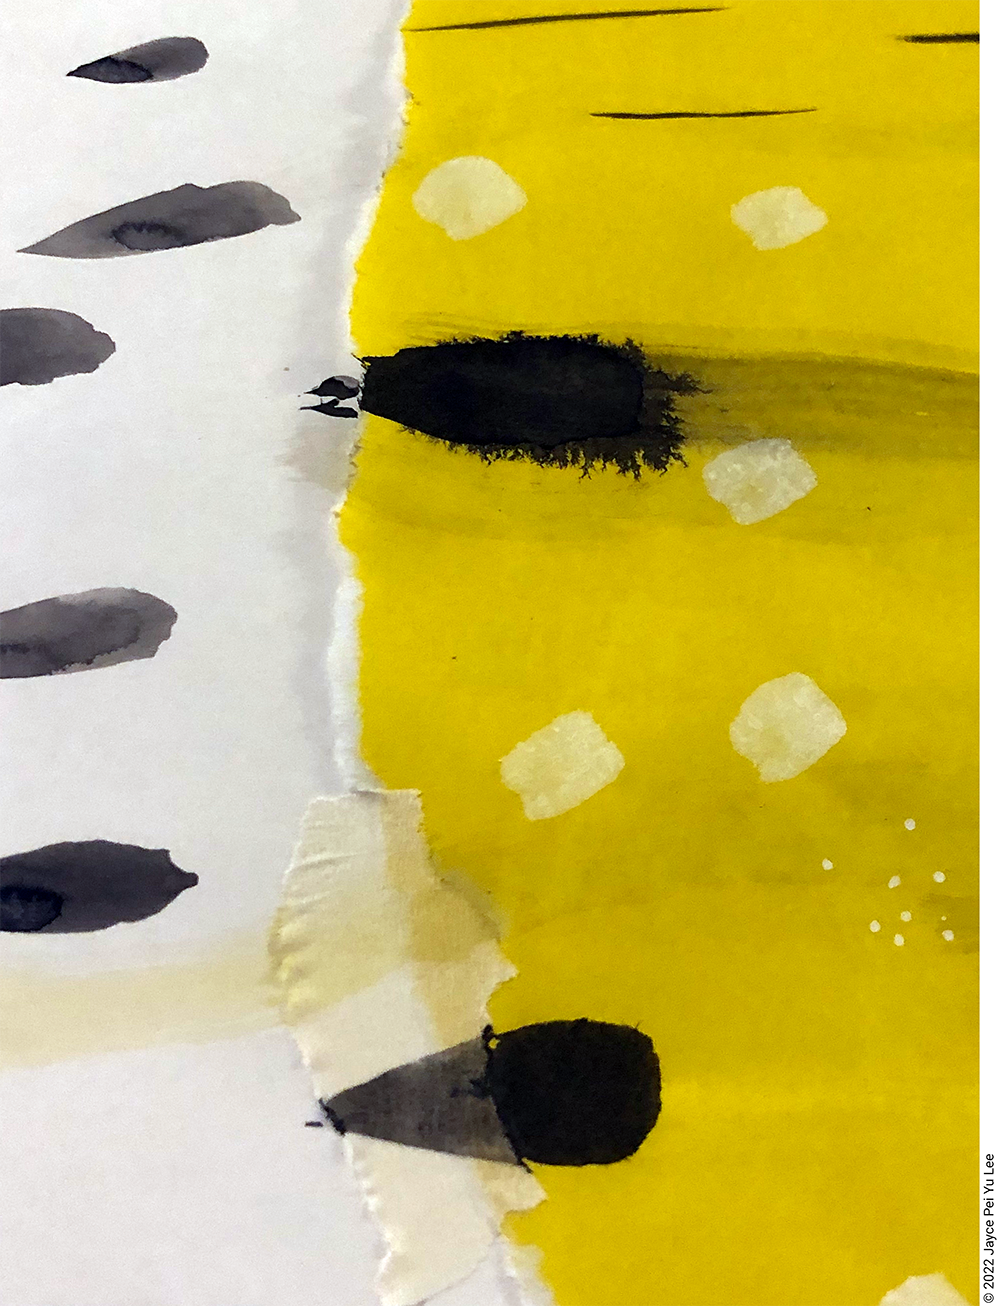 An excerpt of a drawing by Jayce Pei Yu Lee, on ripped paper with tape, using brush and inks to create a movement of phase shift from left to right, with dots that travel from a white to yellow background.